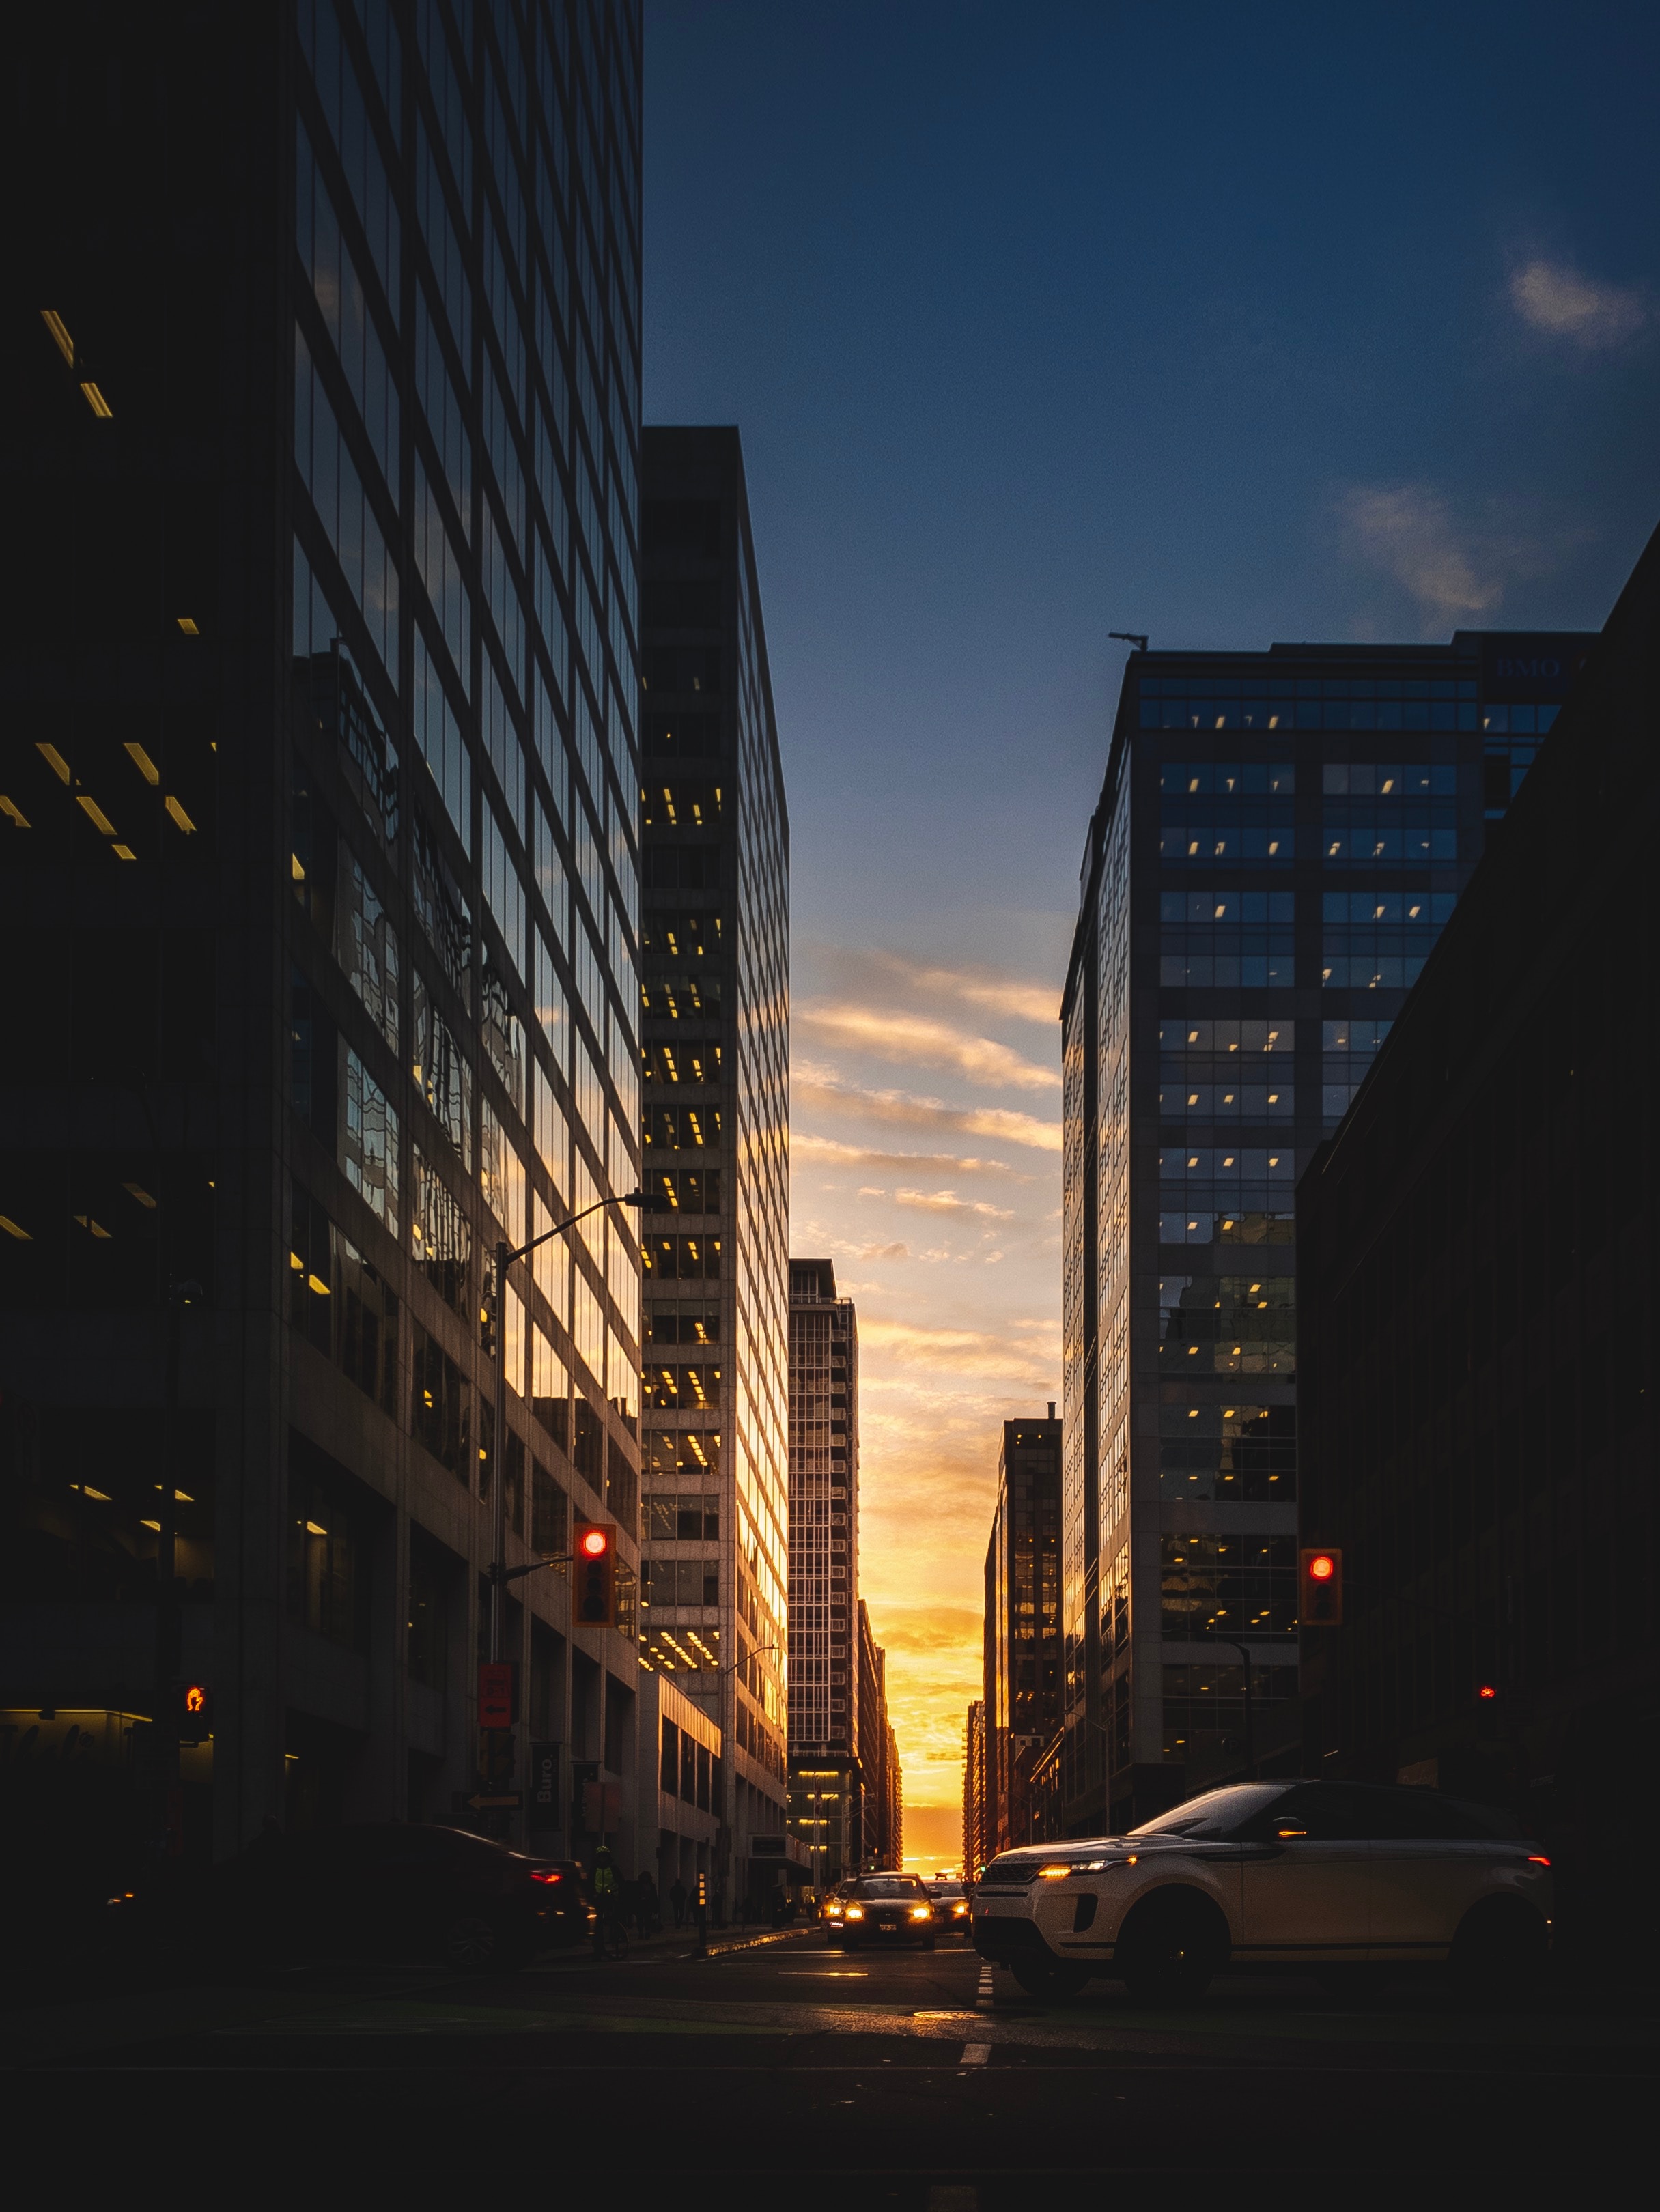 wallpapers twilight, cities, cars, city, building, dusk, street